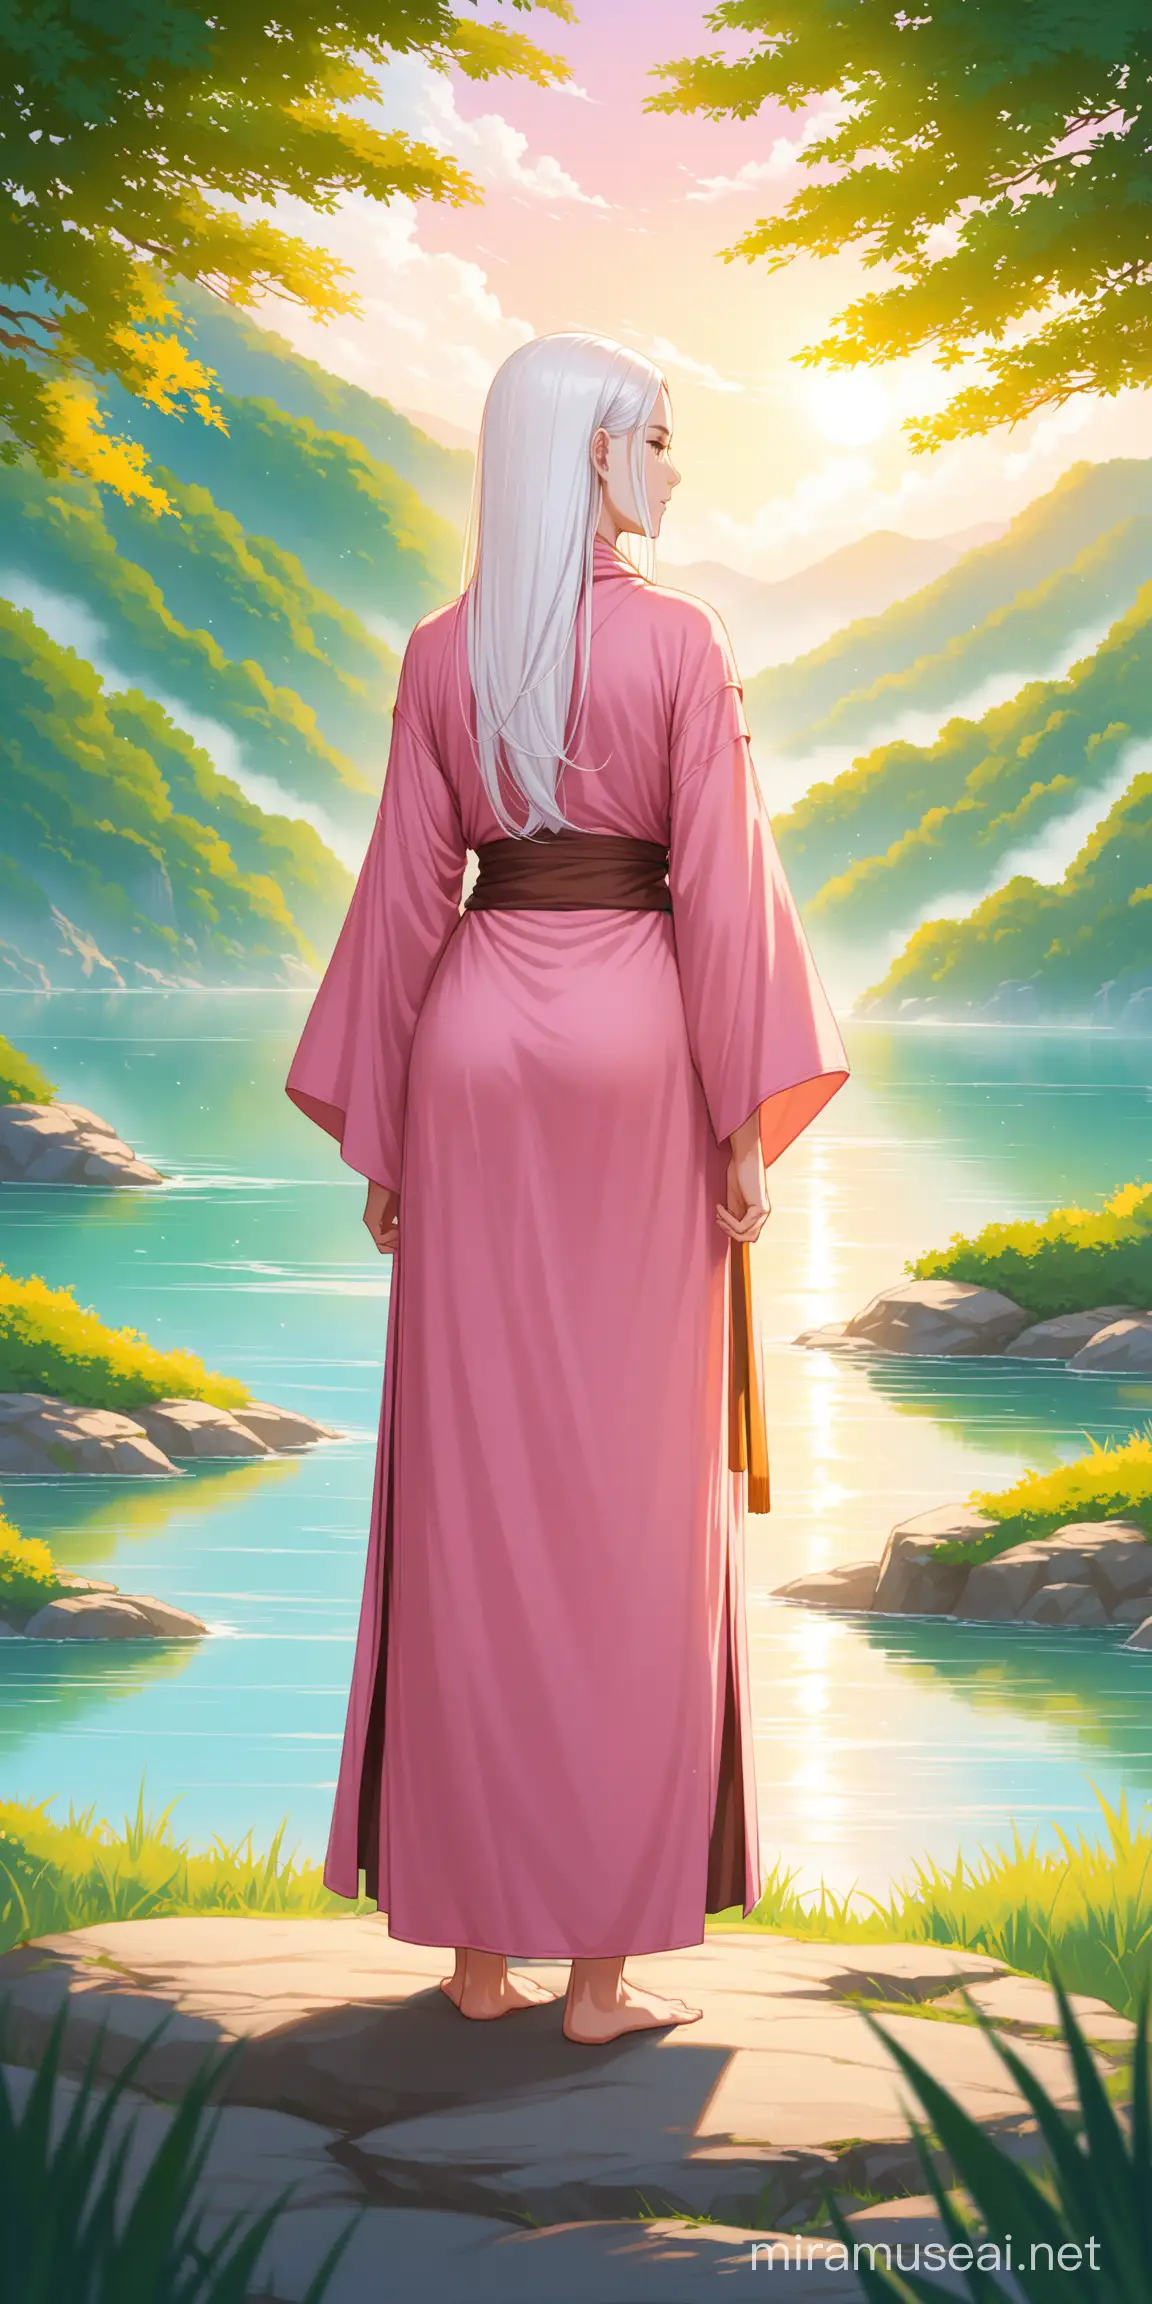 Tranquil Female Warrior Monk in White and Pink Robe amidst Nature